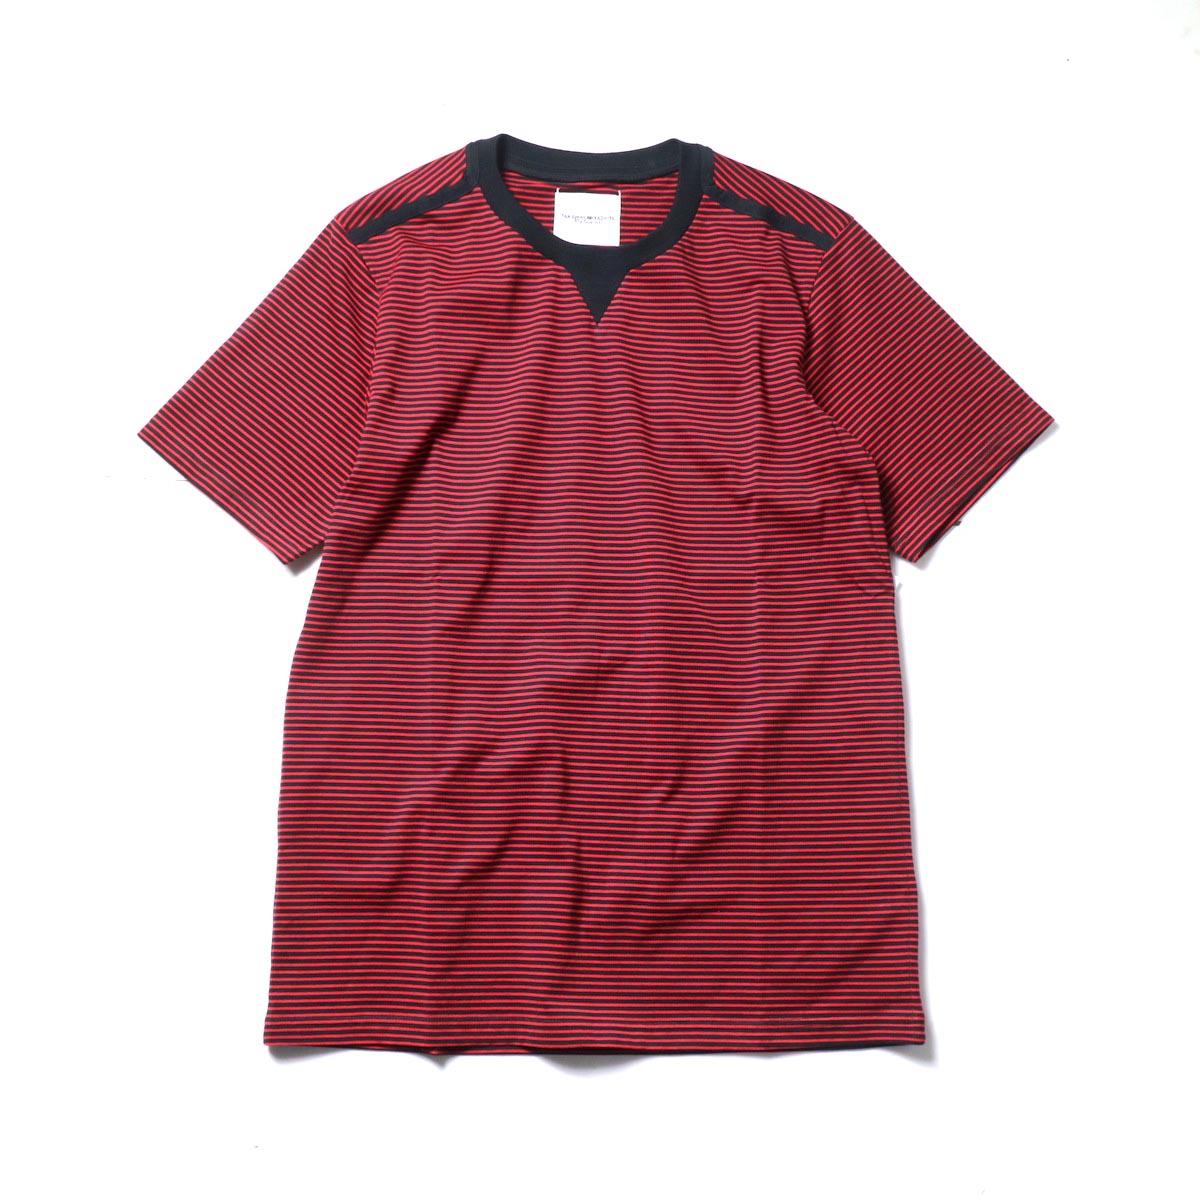 The Soloist / swc.0009a crew neck s/s striped tee. (Black × Red)